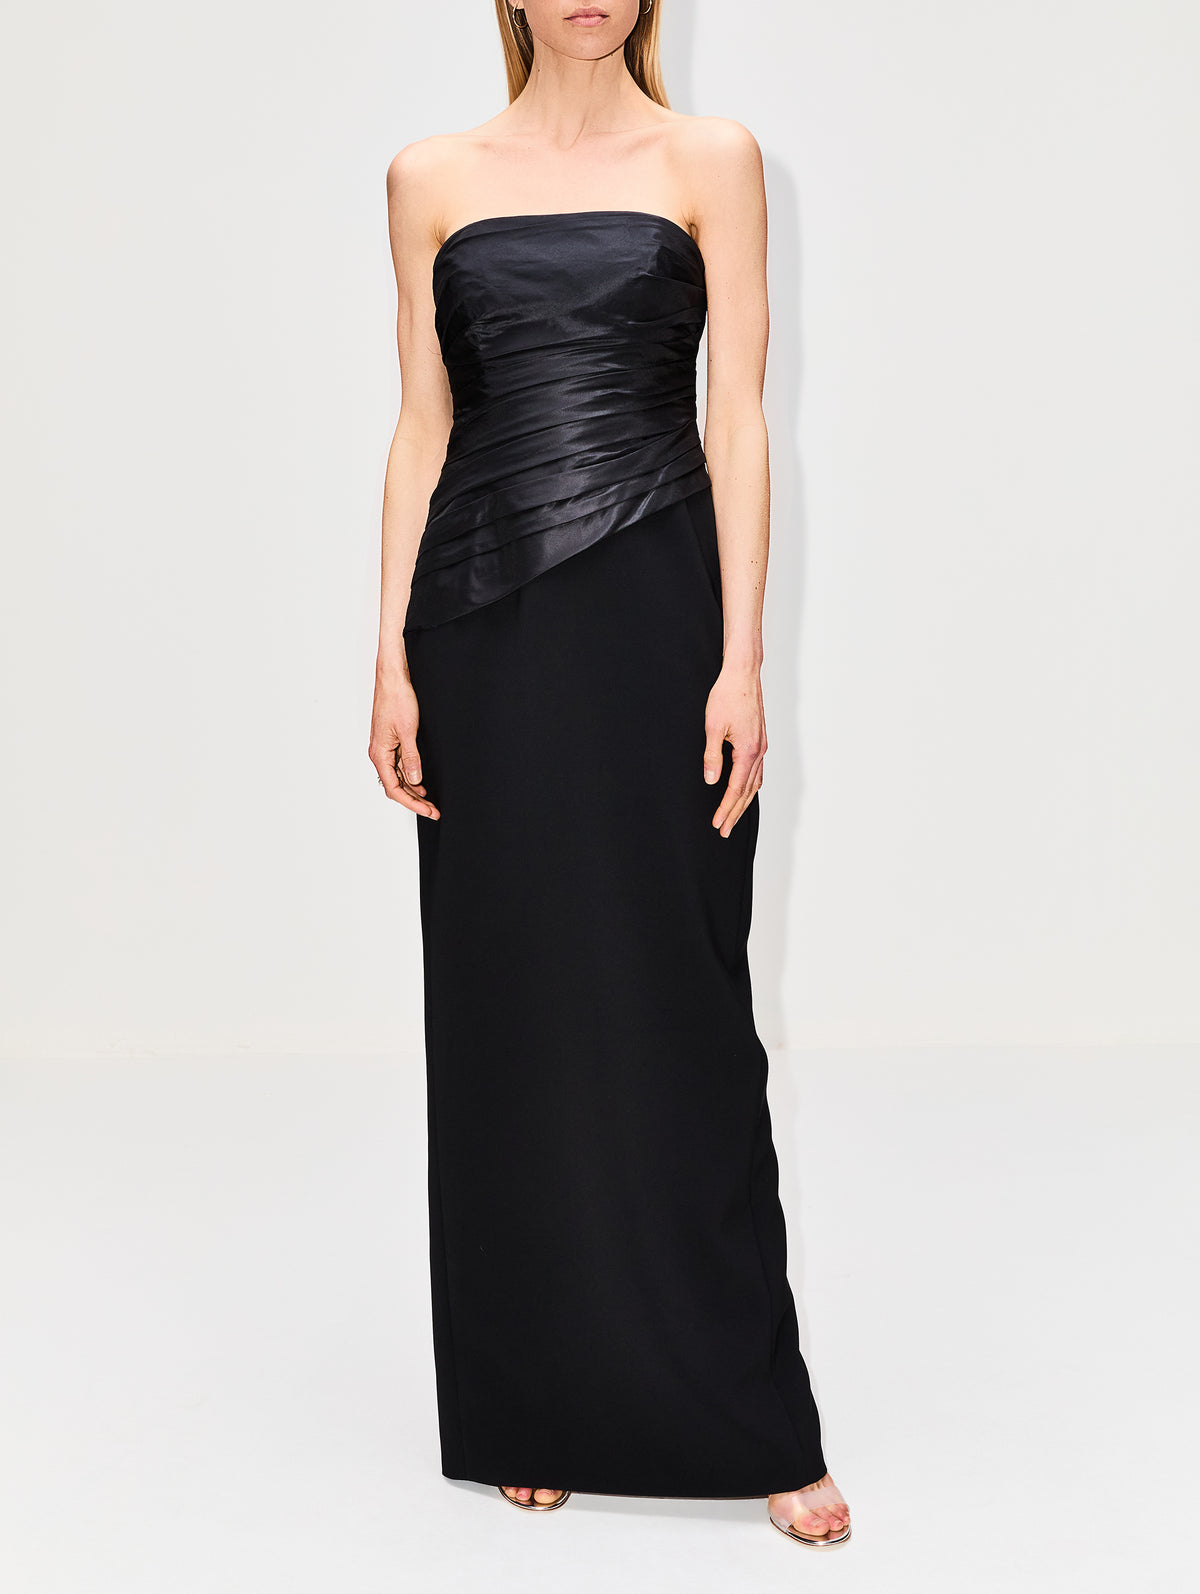 view 2 - Strapless Ruched Bodice Gown